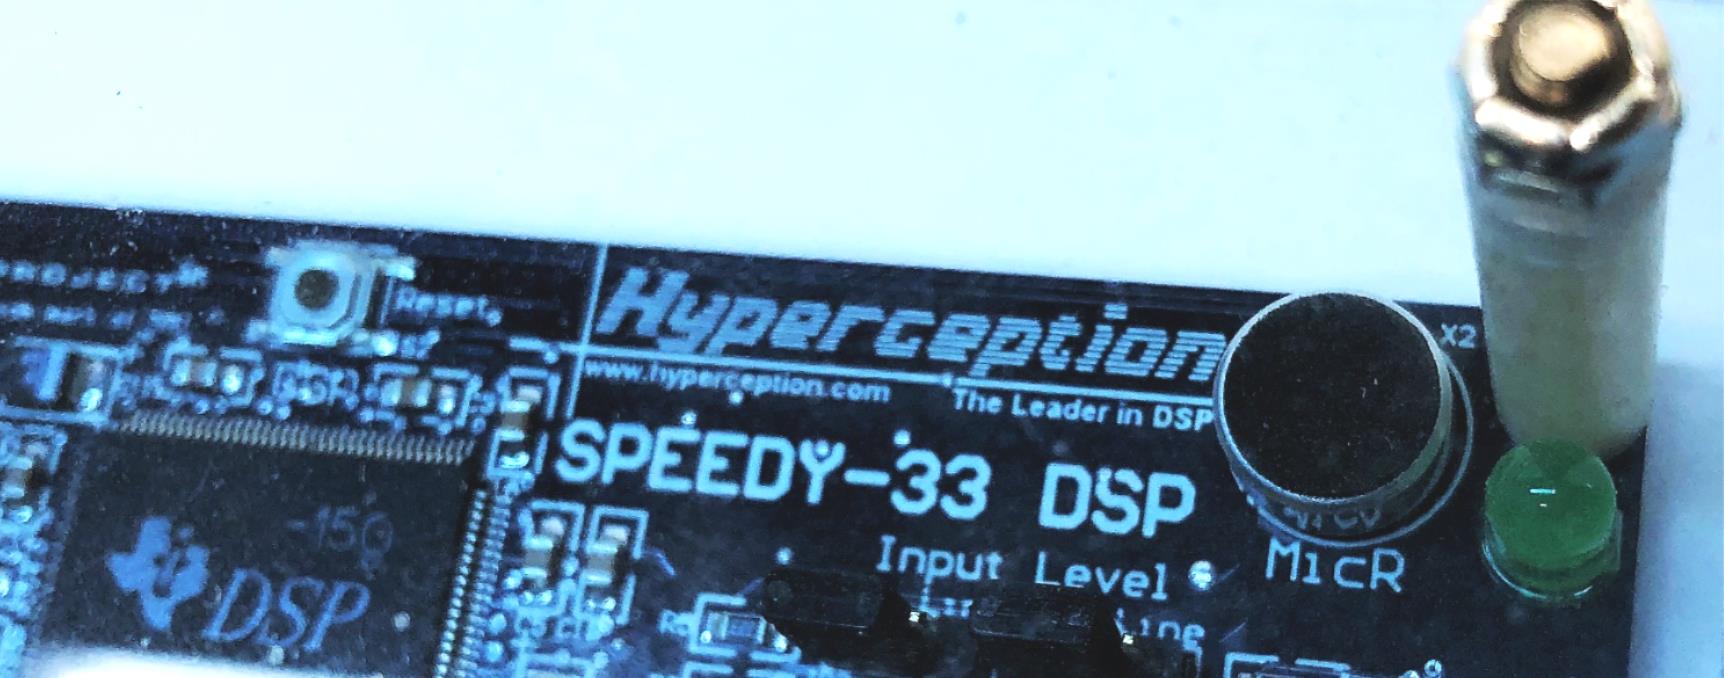 National Instruments Hyperception Board ONLY For SPEEDY-33 DSP HHTI0033 USED